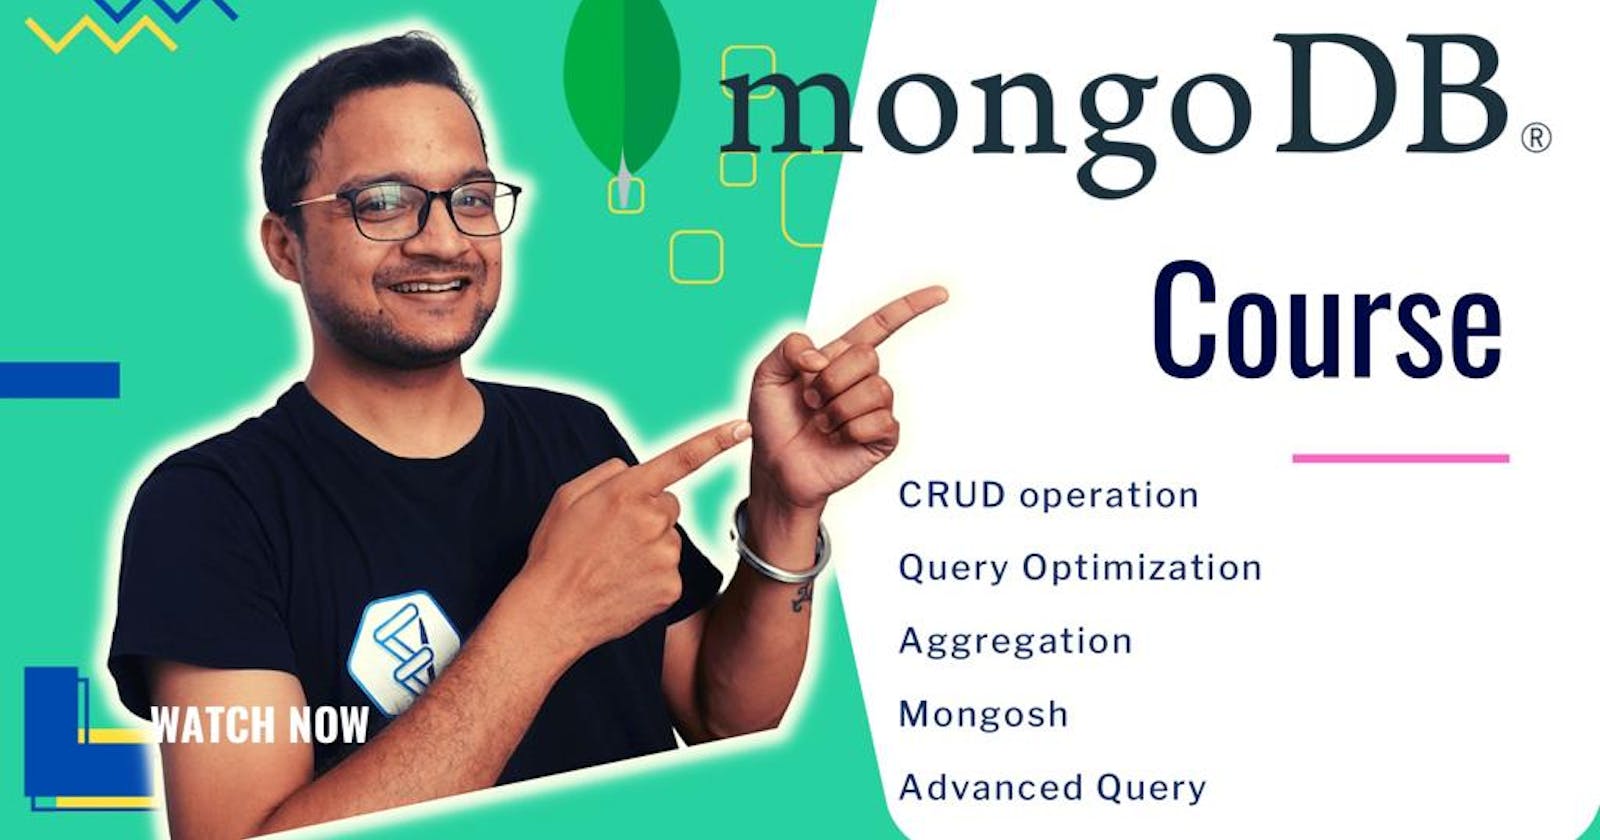 Everything you should know about MongoDB